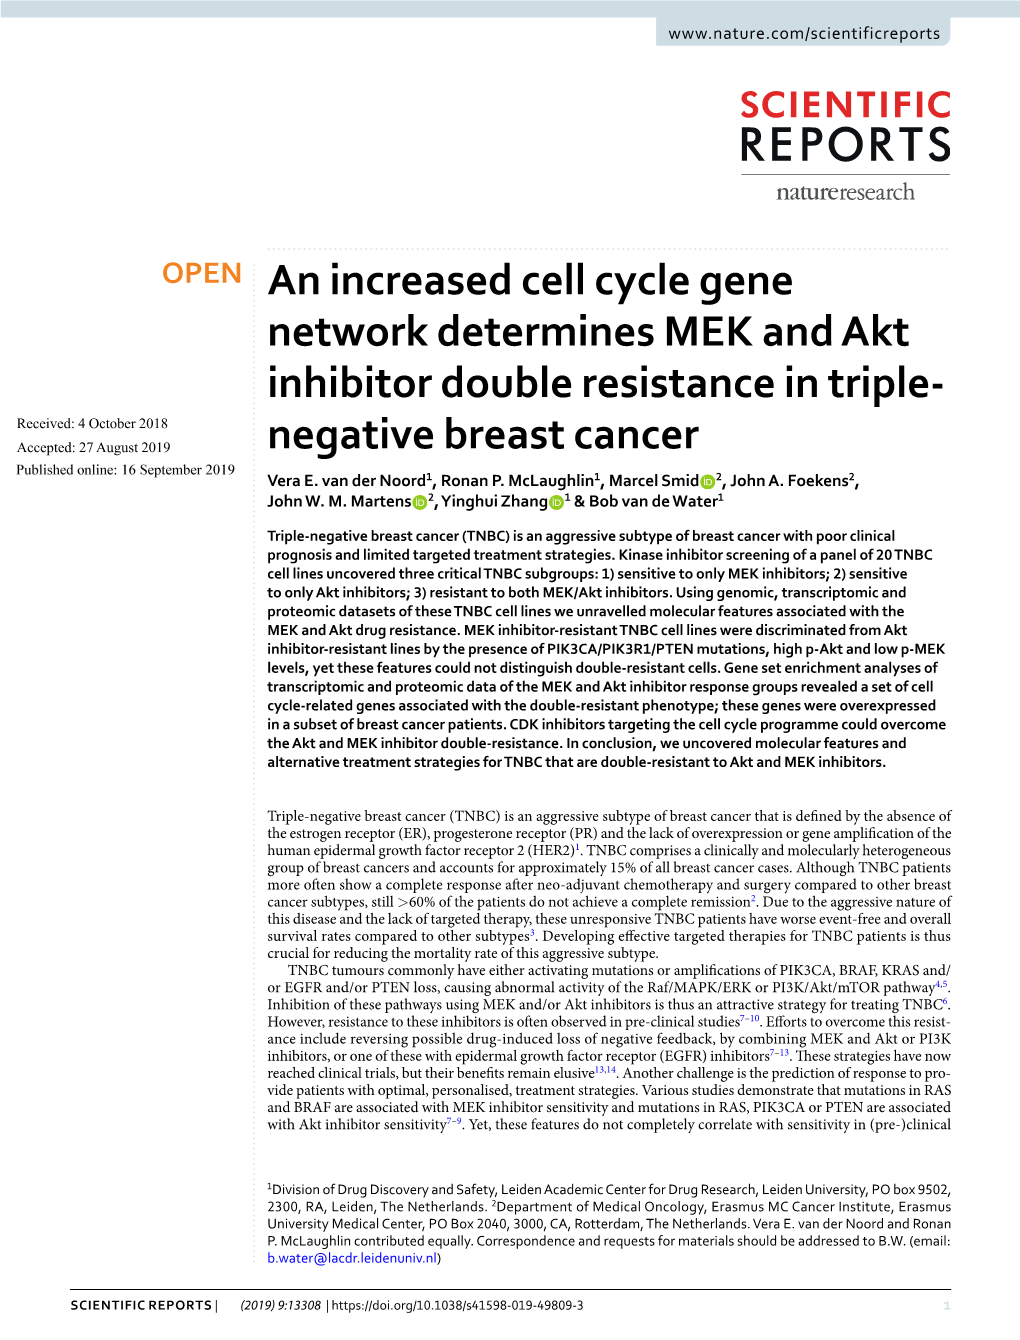 An Increased Cell Cycle Gene Network Determines MEK and Akt Inhibitor Double Resistance in Triple-Negative Breast Cancer